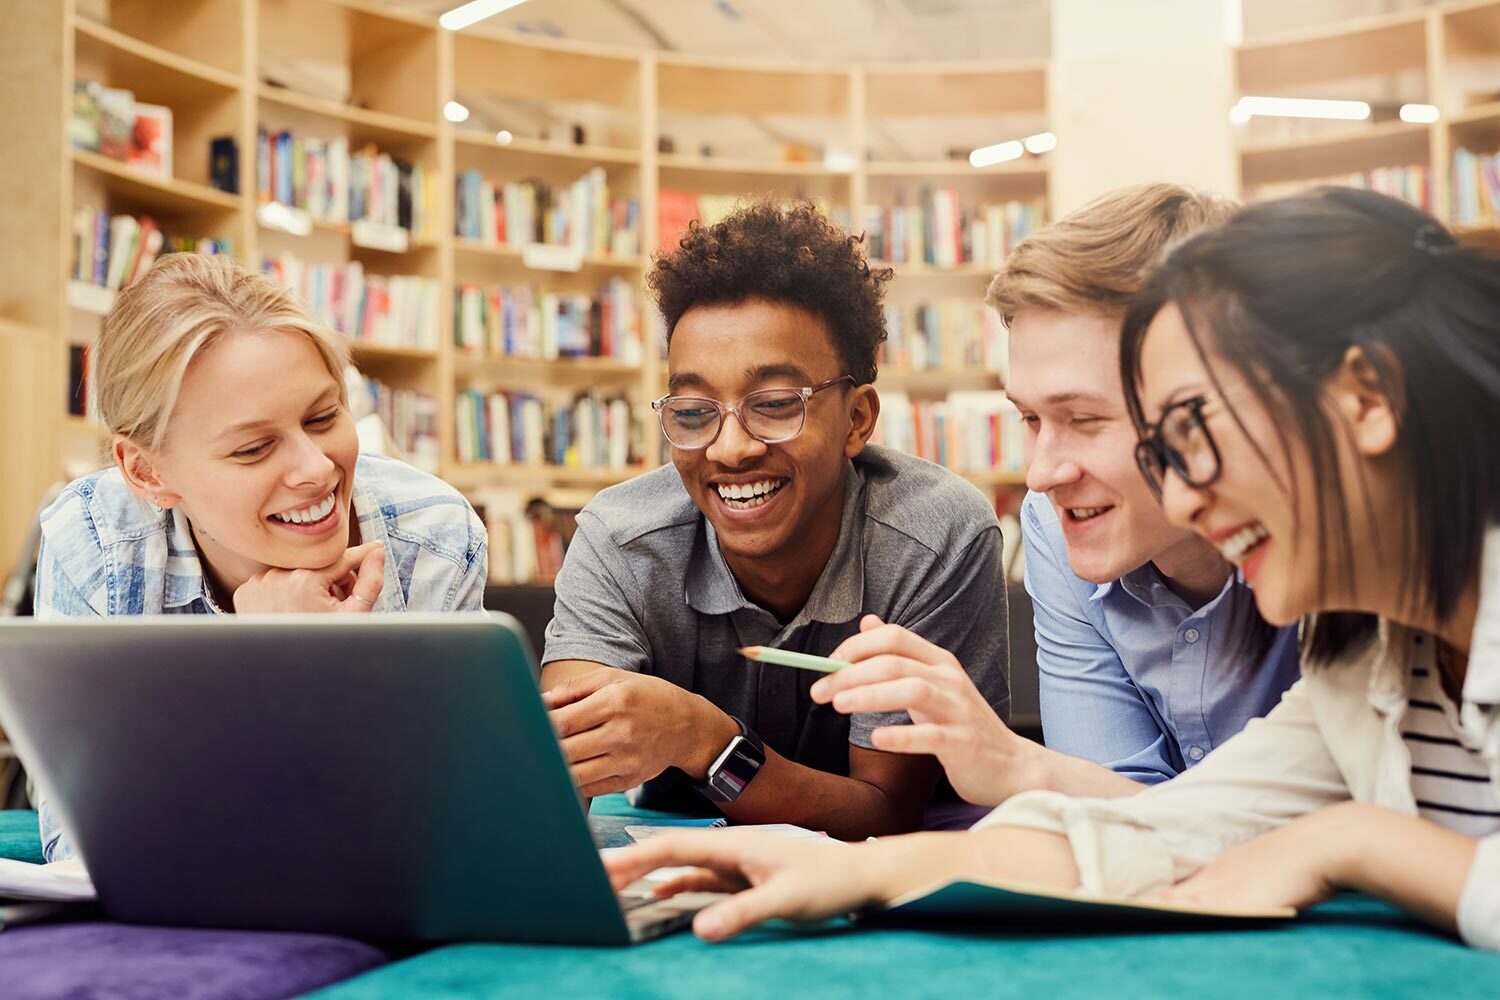 Teens in library watching video on computer